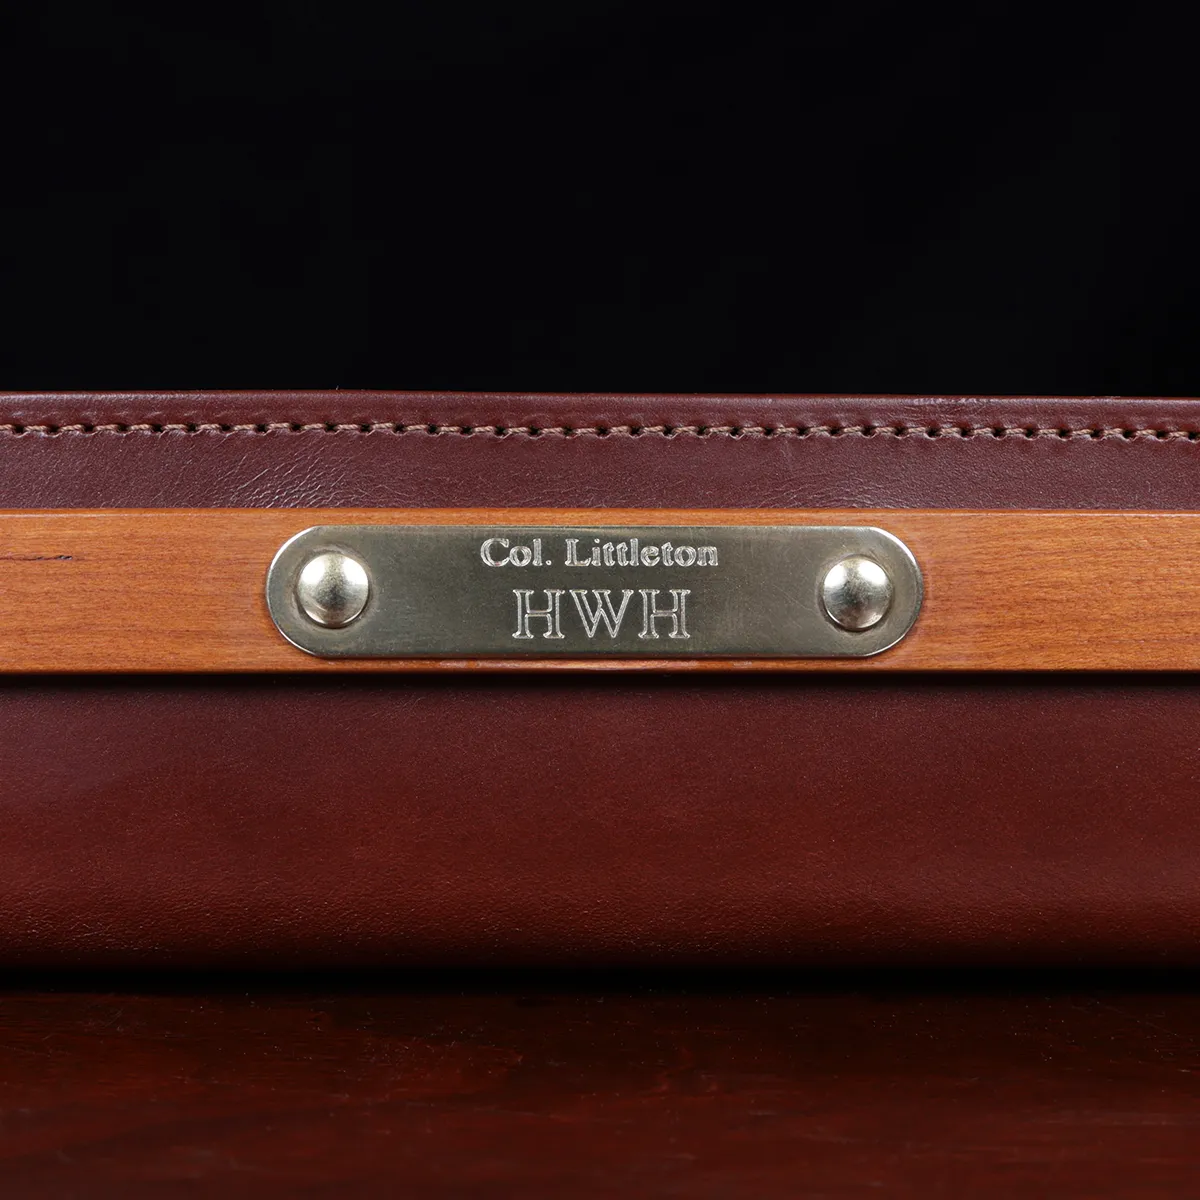 No. 120 Valet Tray on wooden table - front view of initials